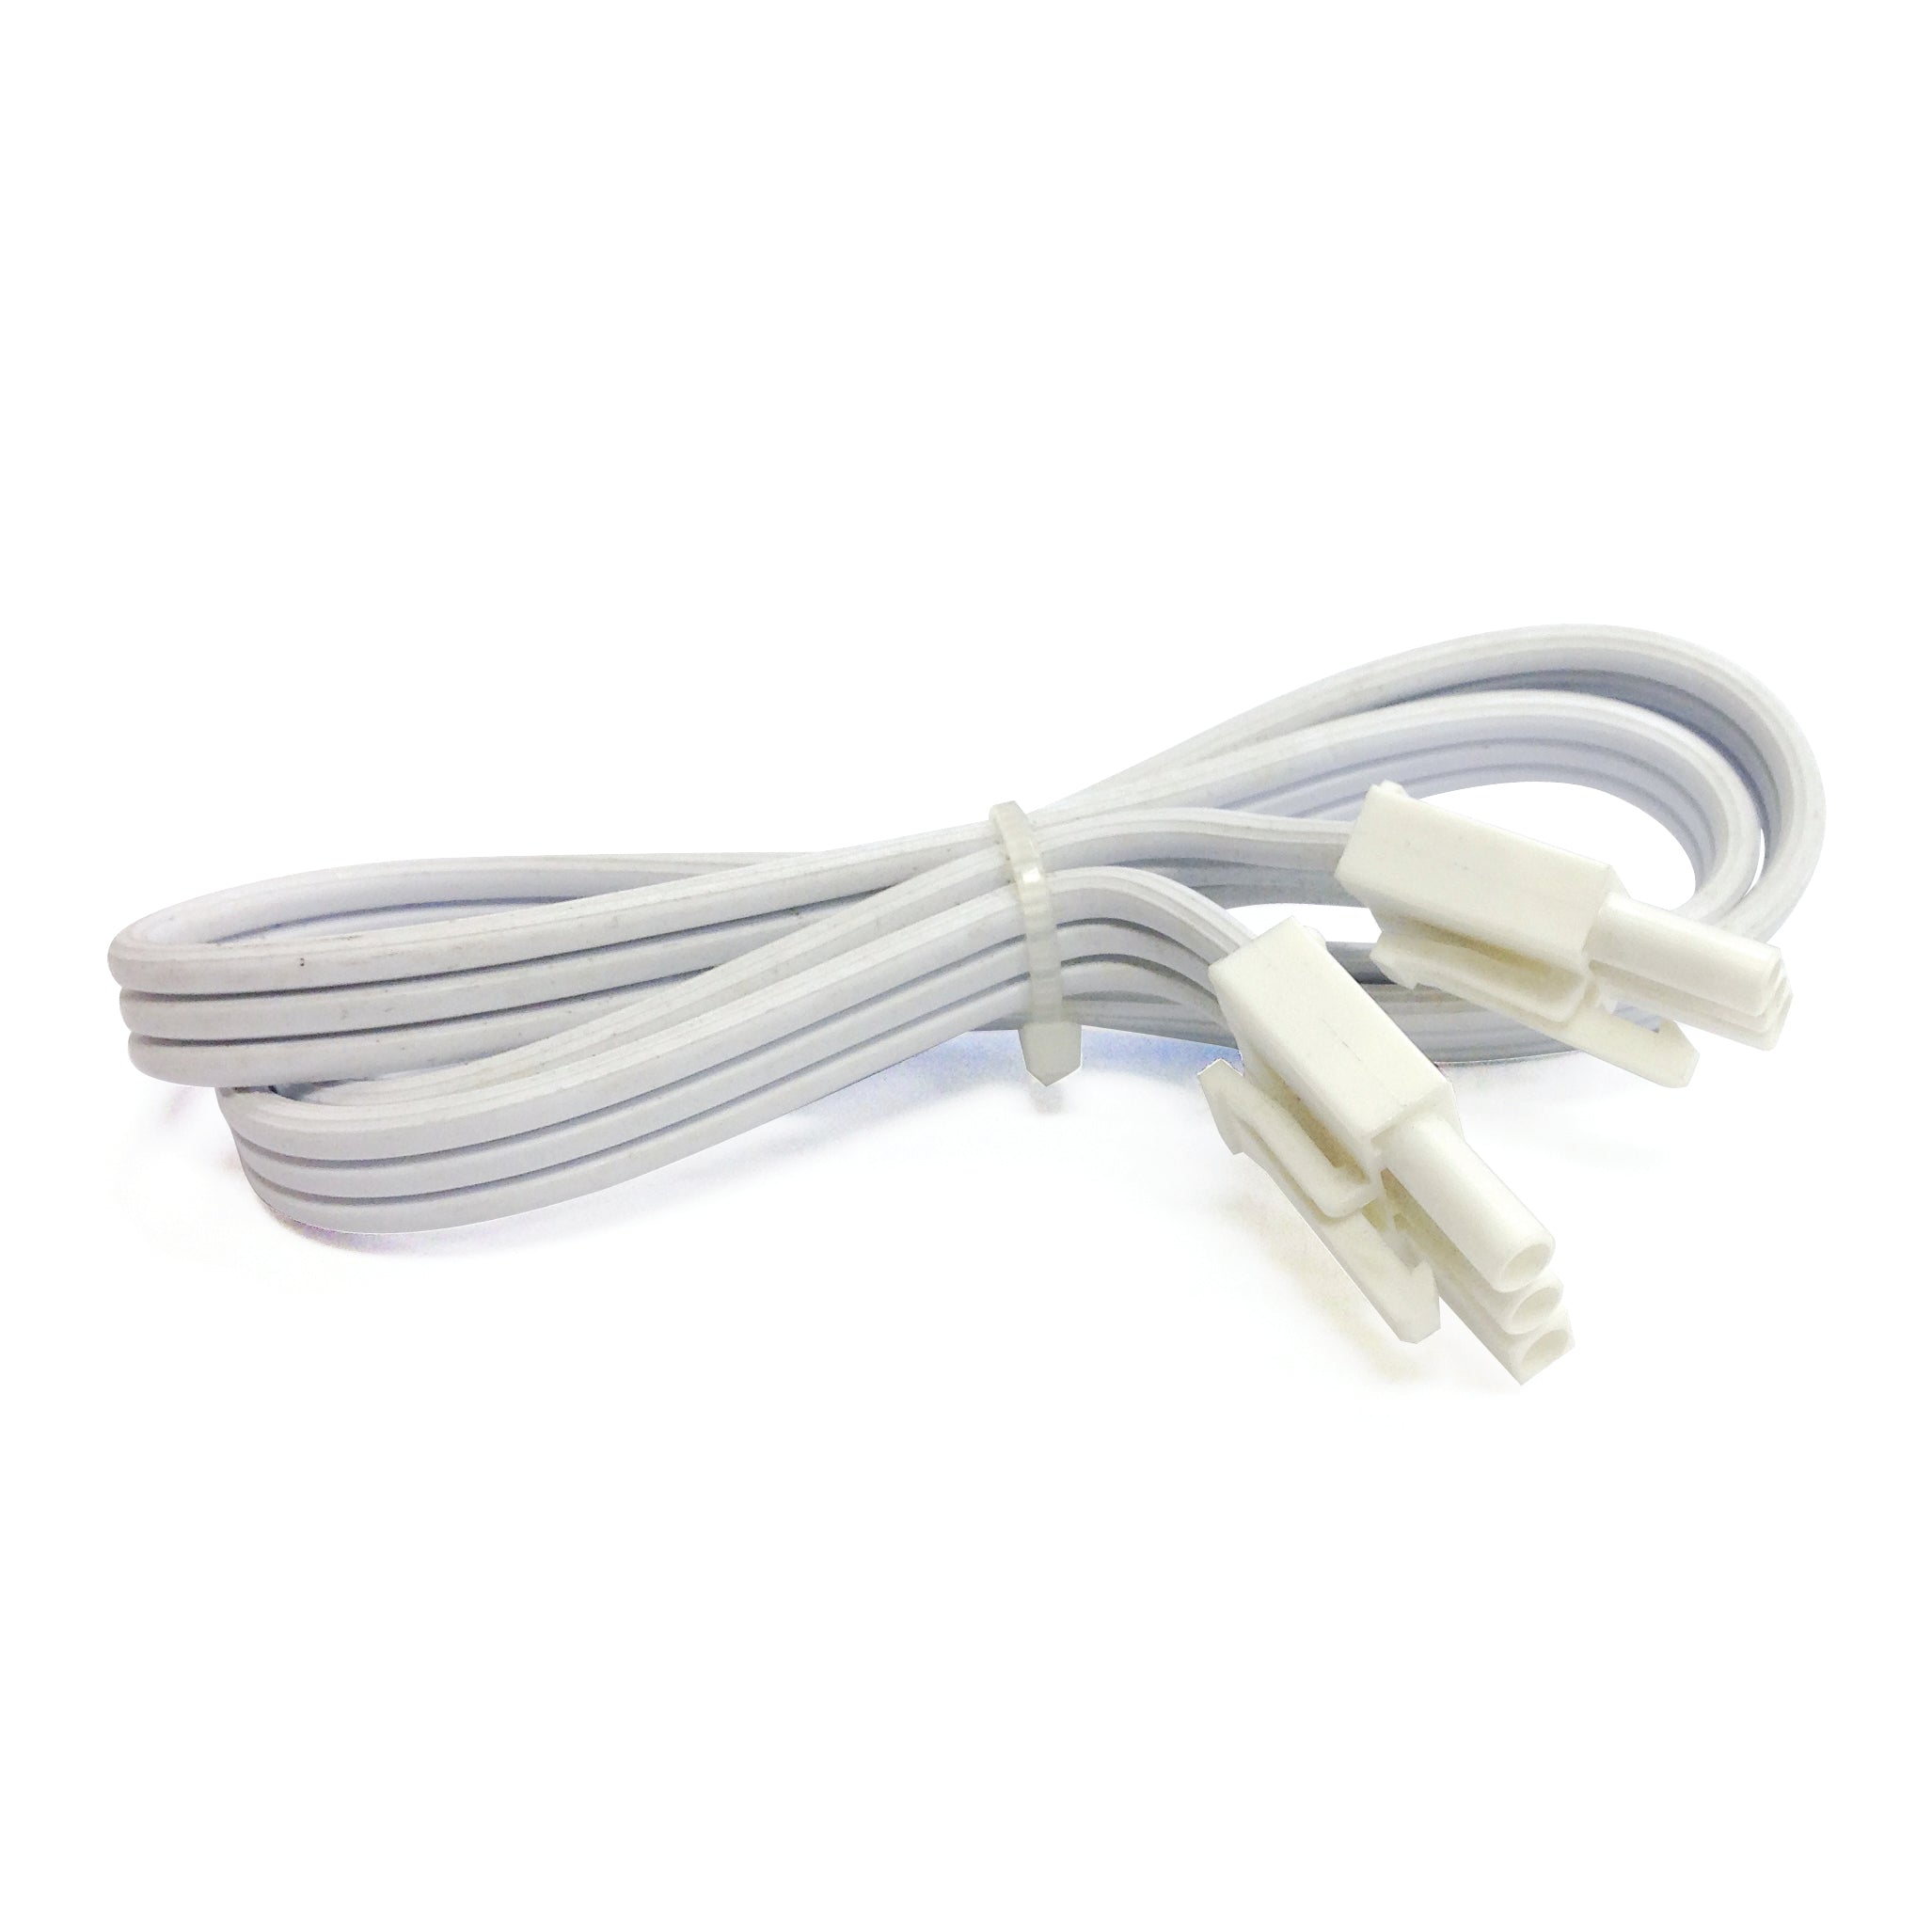 Nora Lighting NUA-806W - Accent / Undercabinet - 6 Inch LEDUR Interconnect Cable, White